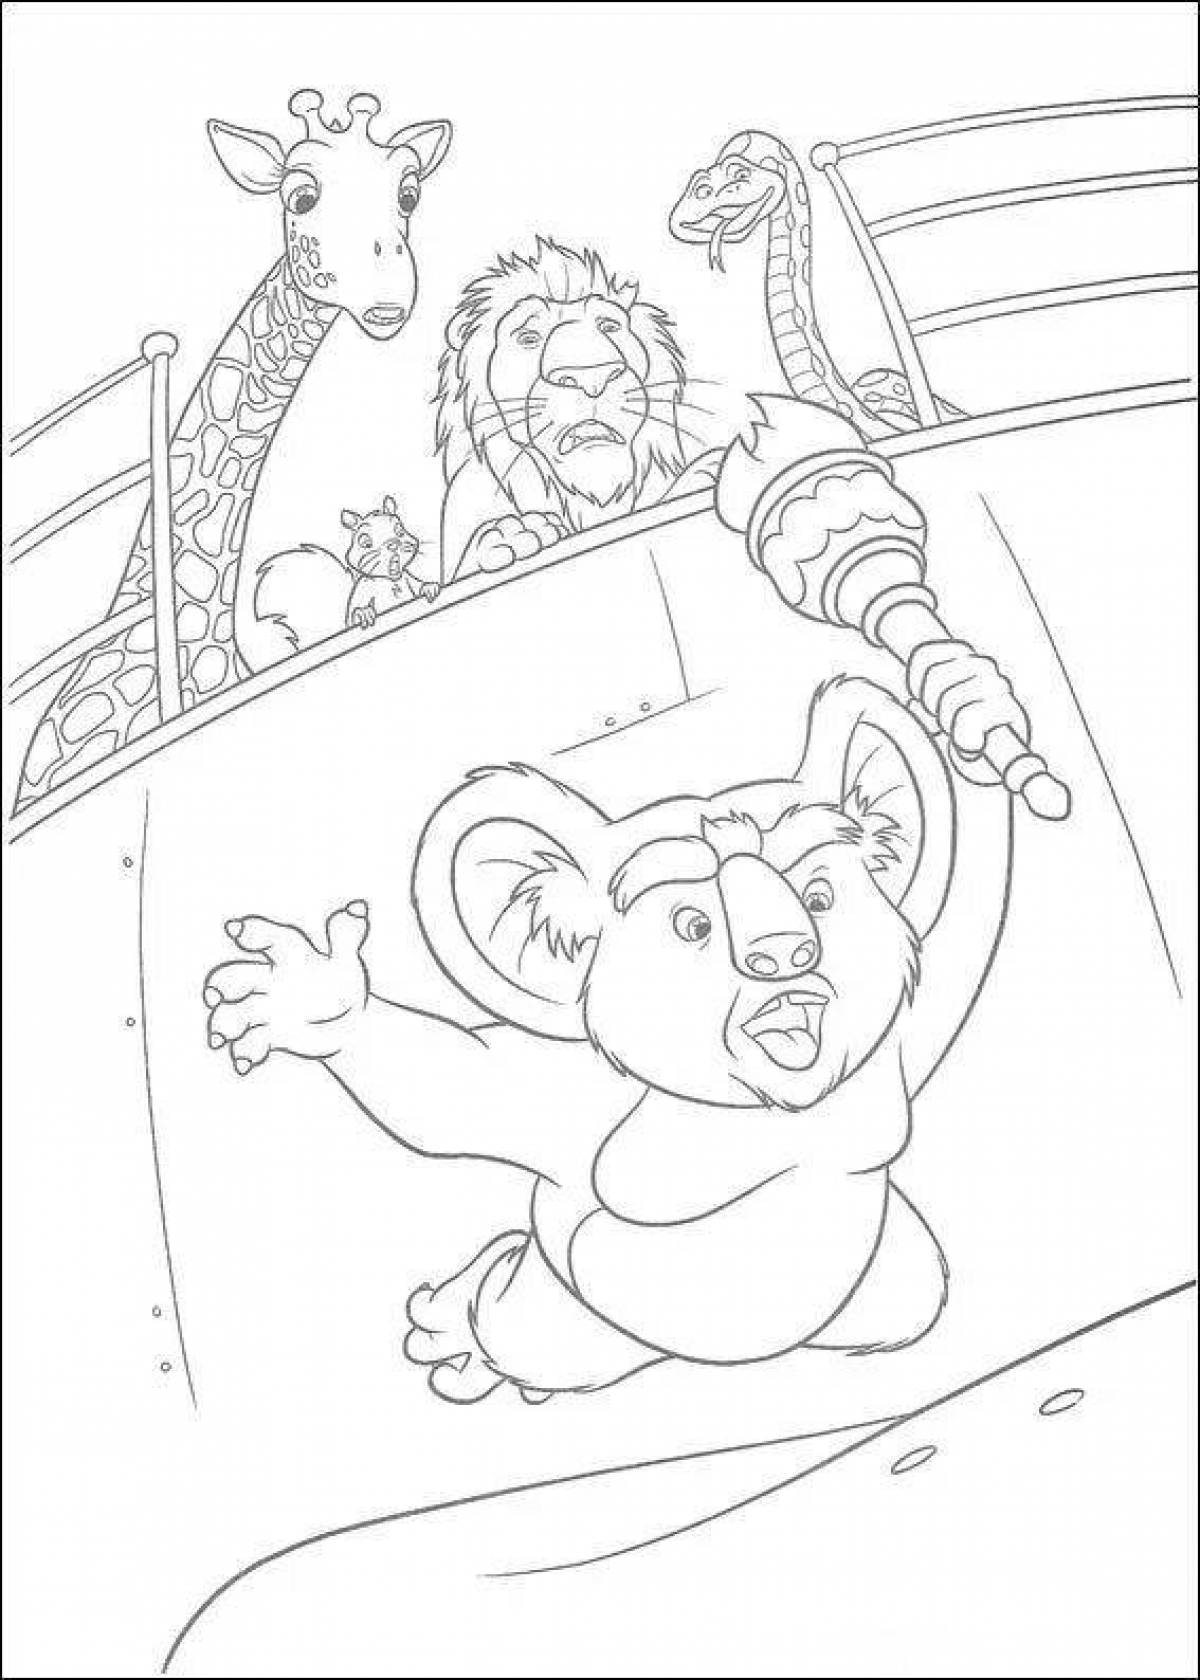 Great adventure coloring page